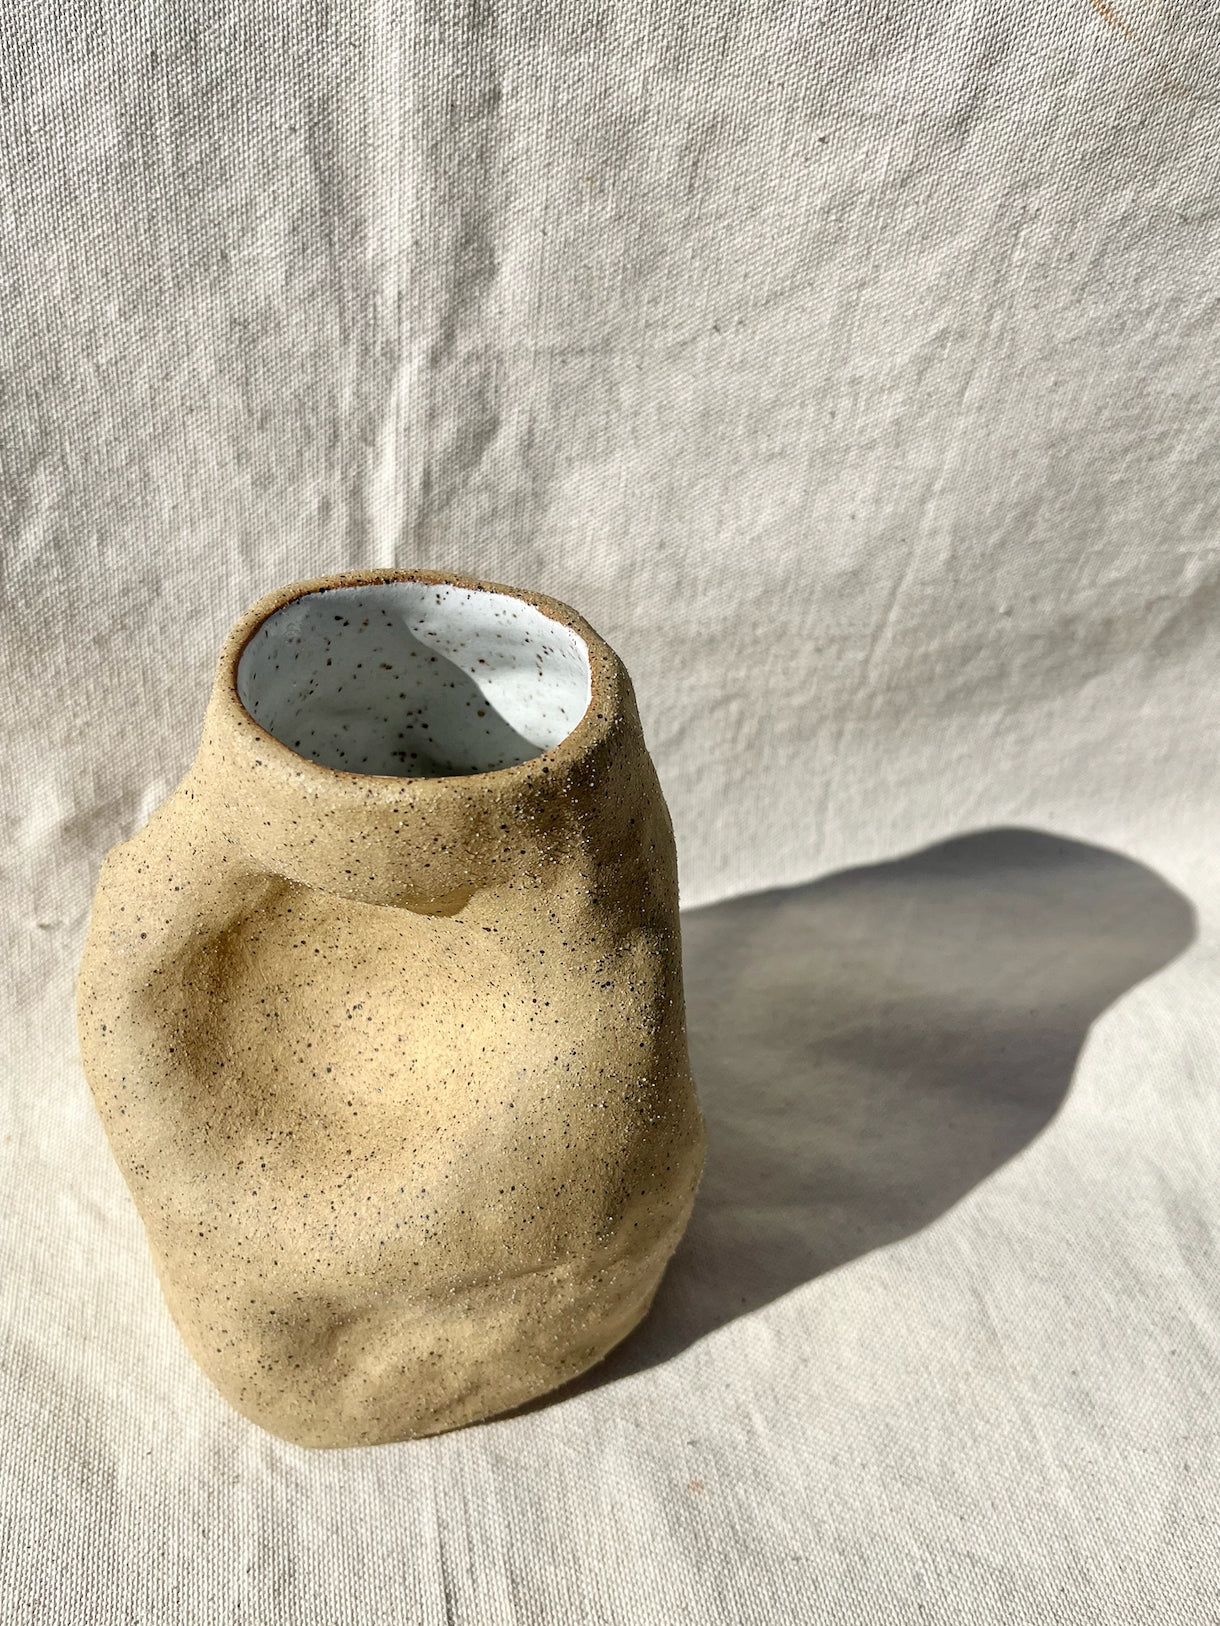 An organic vase with a speckled, textured clay body and white glaze on the inside. A vase for your fresh or dried flowers, yes… but also an alcove to place a teeny treasure to compliment them. Hand built, glazed and fired in Slo, Ca.